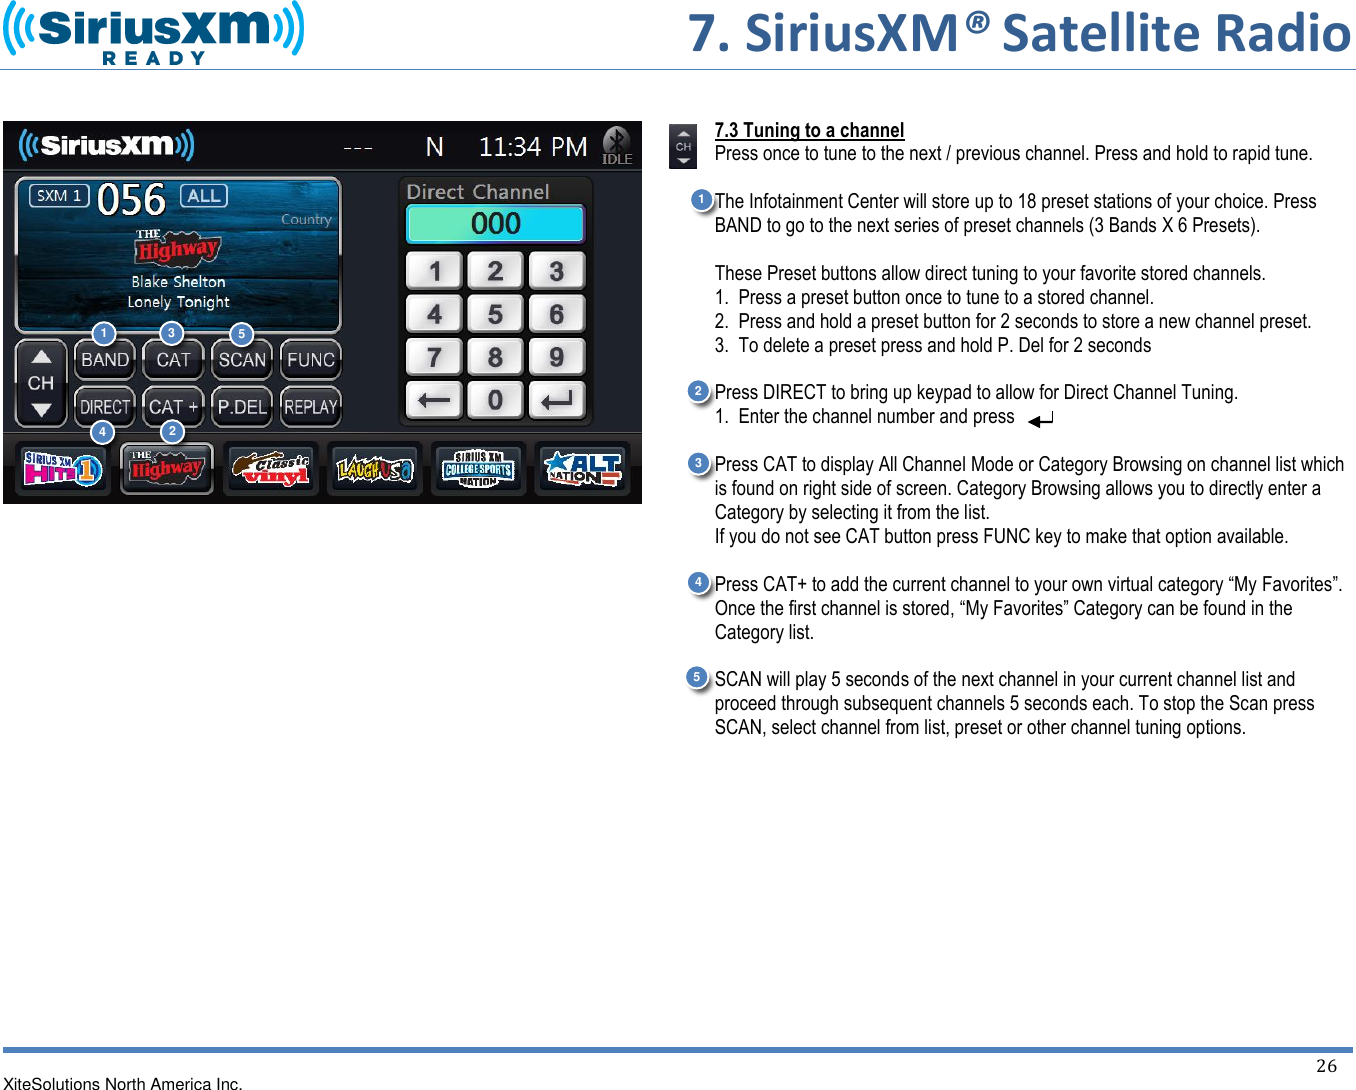      7. SiriusXM® Satellite Radio   XiteSolutions North America Inc.    26                           7.3 Tuning to a channel Press once to tune to the next / previous channel. Press and hold to rapid tune.  The Infotainment Center will store up to 18 preset stations of your choice. Press BAND to go to the next series of preset channels (3 Bands X 6 Presets).  These Preset buttons allow direct tuning to your favorite stored channels.  1.  Press a preset button once to tune to a stored channel.  2.  Press and hold a preset button for 2 seconds to store a new channel preset. 3.  To delete a preset press and hold P. Del for 2 seconds  Press DIRECT to bring up keypad to allow for Direct Channel Tuning.   1.  Enter the channel number and press   Press CAT to display All Channel Mode or Category Browsing on channel list which is found on right side of screen. Category Browsing allows you to directly enter a Category by selecting it from the list. If you do not see CAT button press FUNC key to make that option available.  Press CAT+ to add the current channel to your own virtual category “My Favorites”. Once the first channel is stored, “My Favorites” Category can be found in the Category list.   SCAN will play 5 seconds of the next channel in your current channel list and proceed through subsequent channels 5 seconds each. To stop the Scan press SCAN, select channel from list, preset or other channel tuning options.     1 2 1 2 3 4 5 3 4 5 